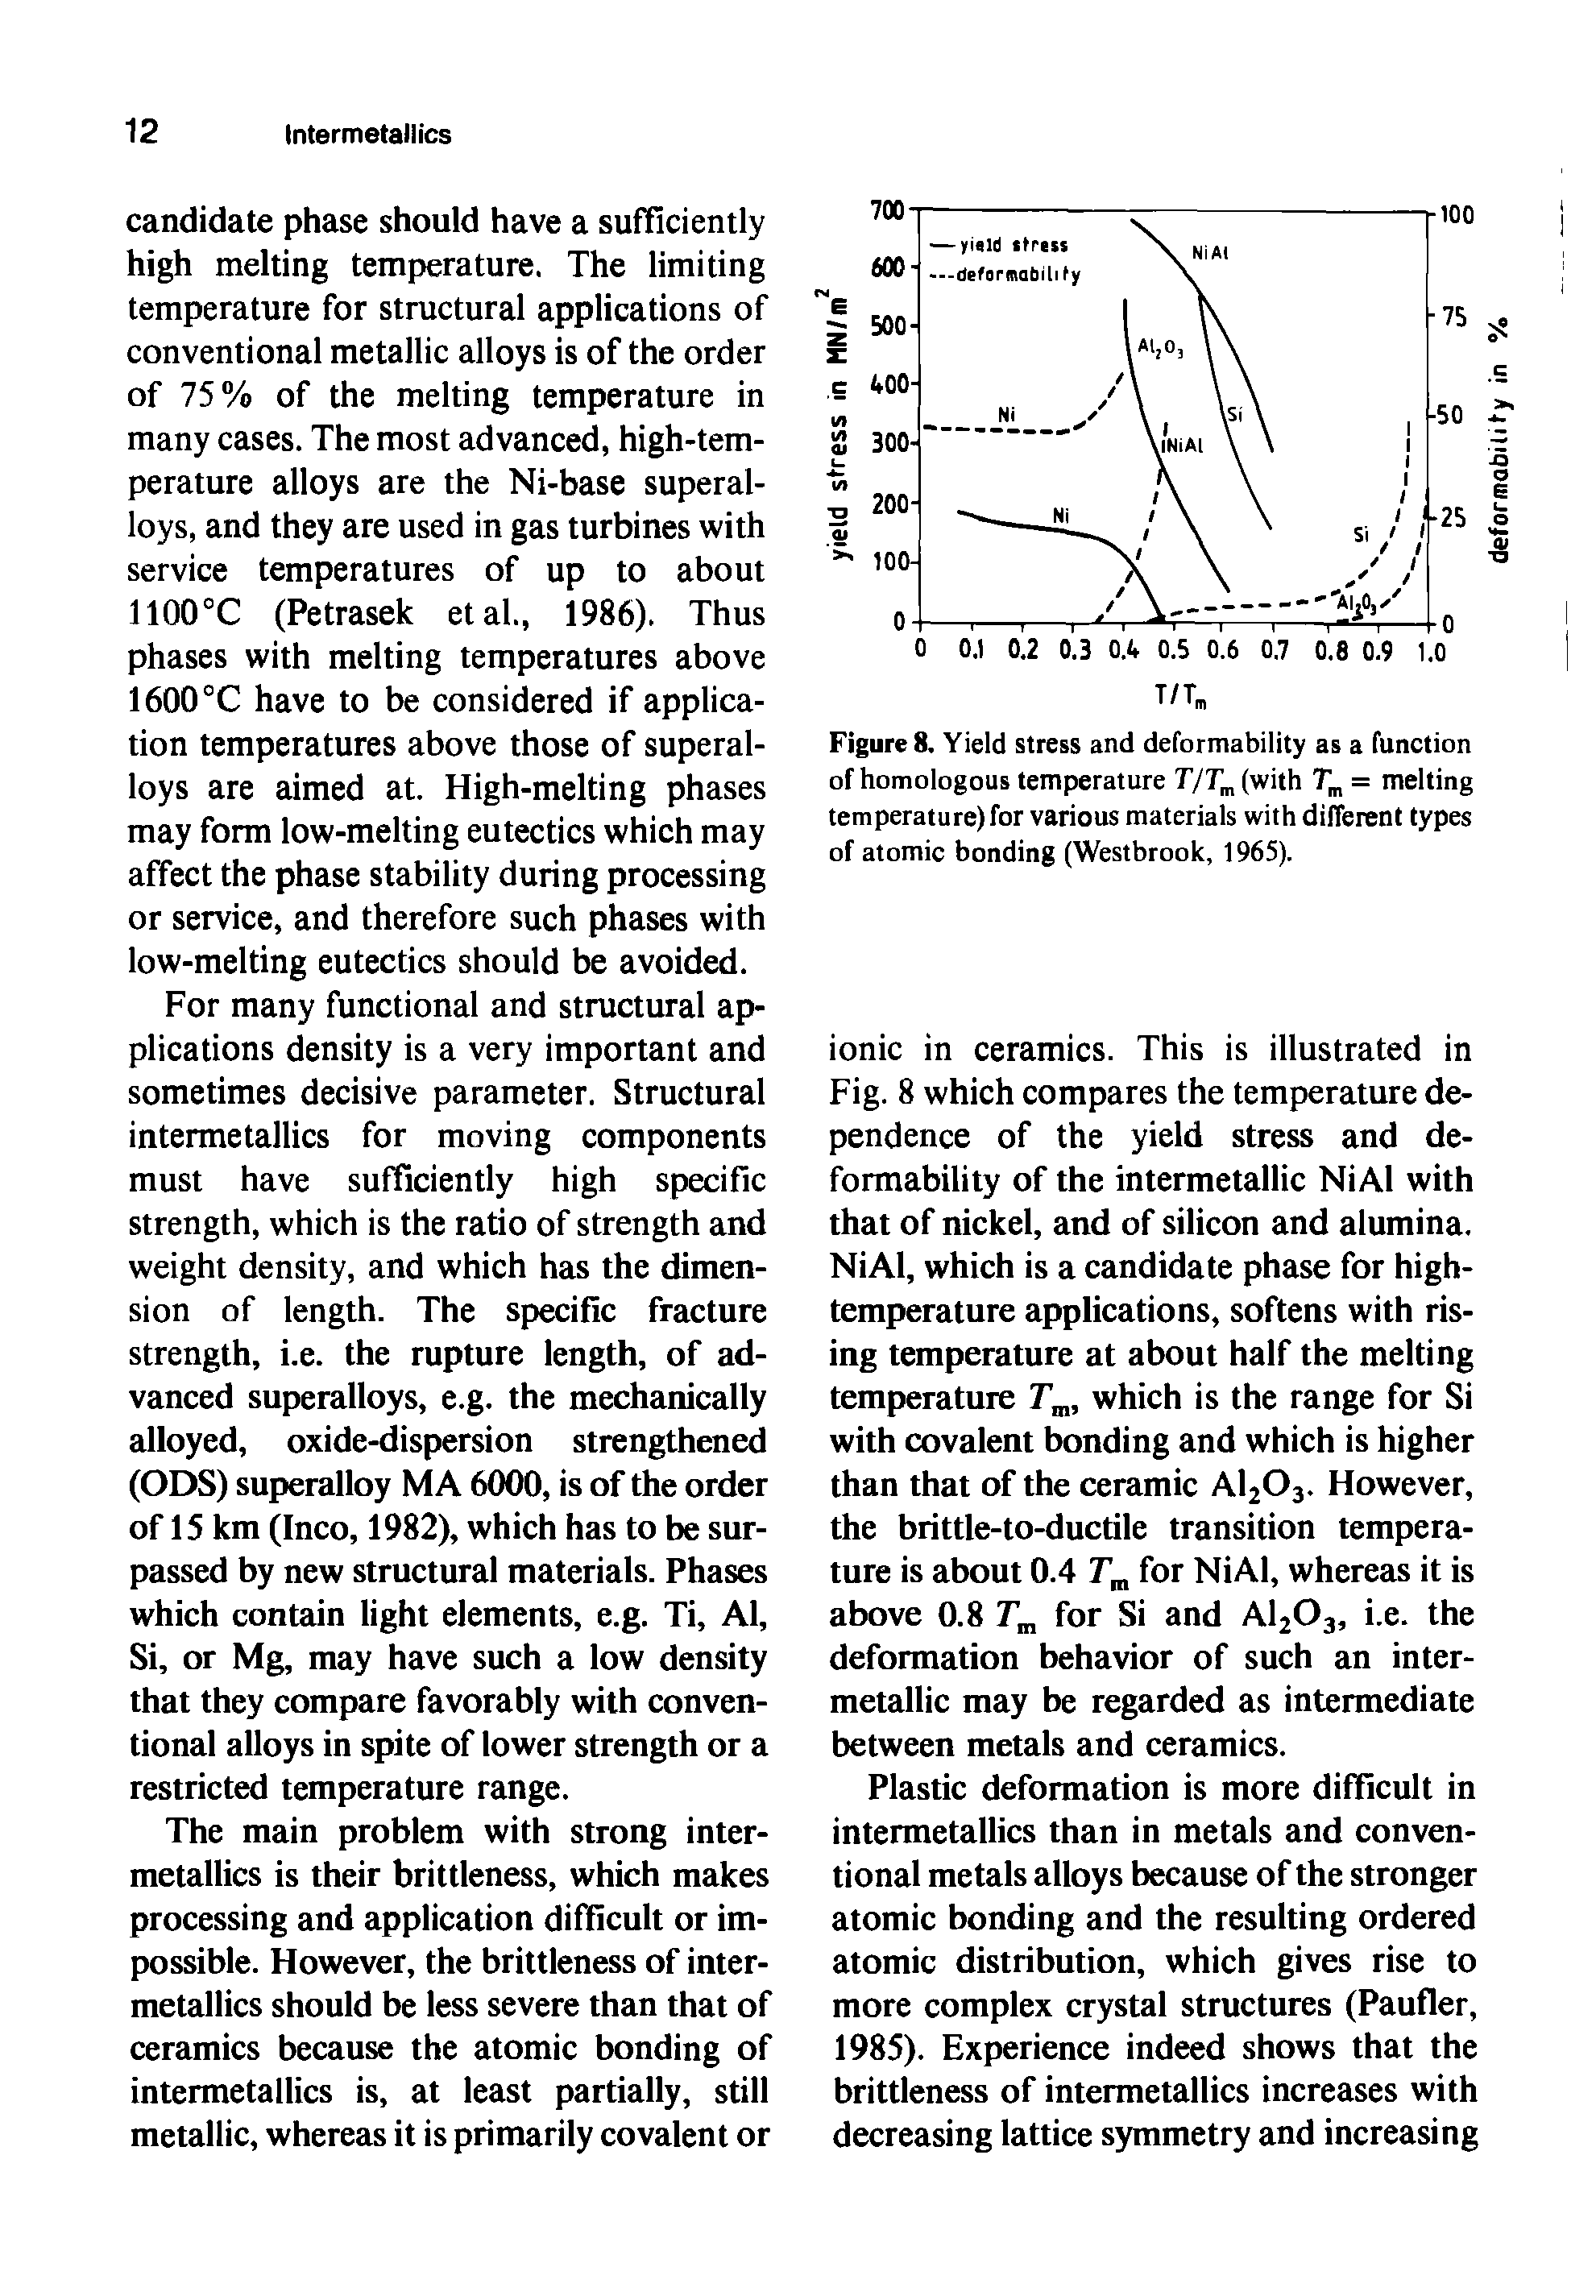 Figures. Yield stress and deformability as a function of homologous temperature TJT (with = melting temperature) for various materials with different types of atomic bonding (Westbrook, 1965).